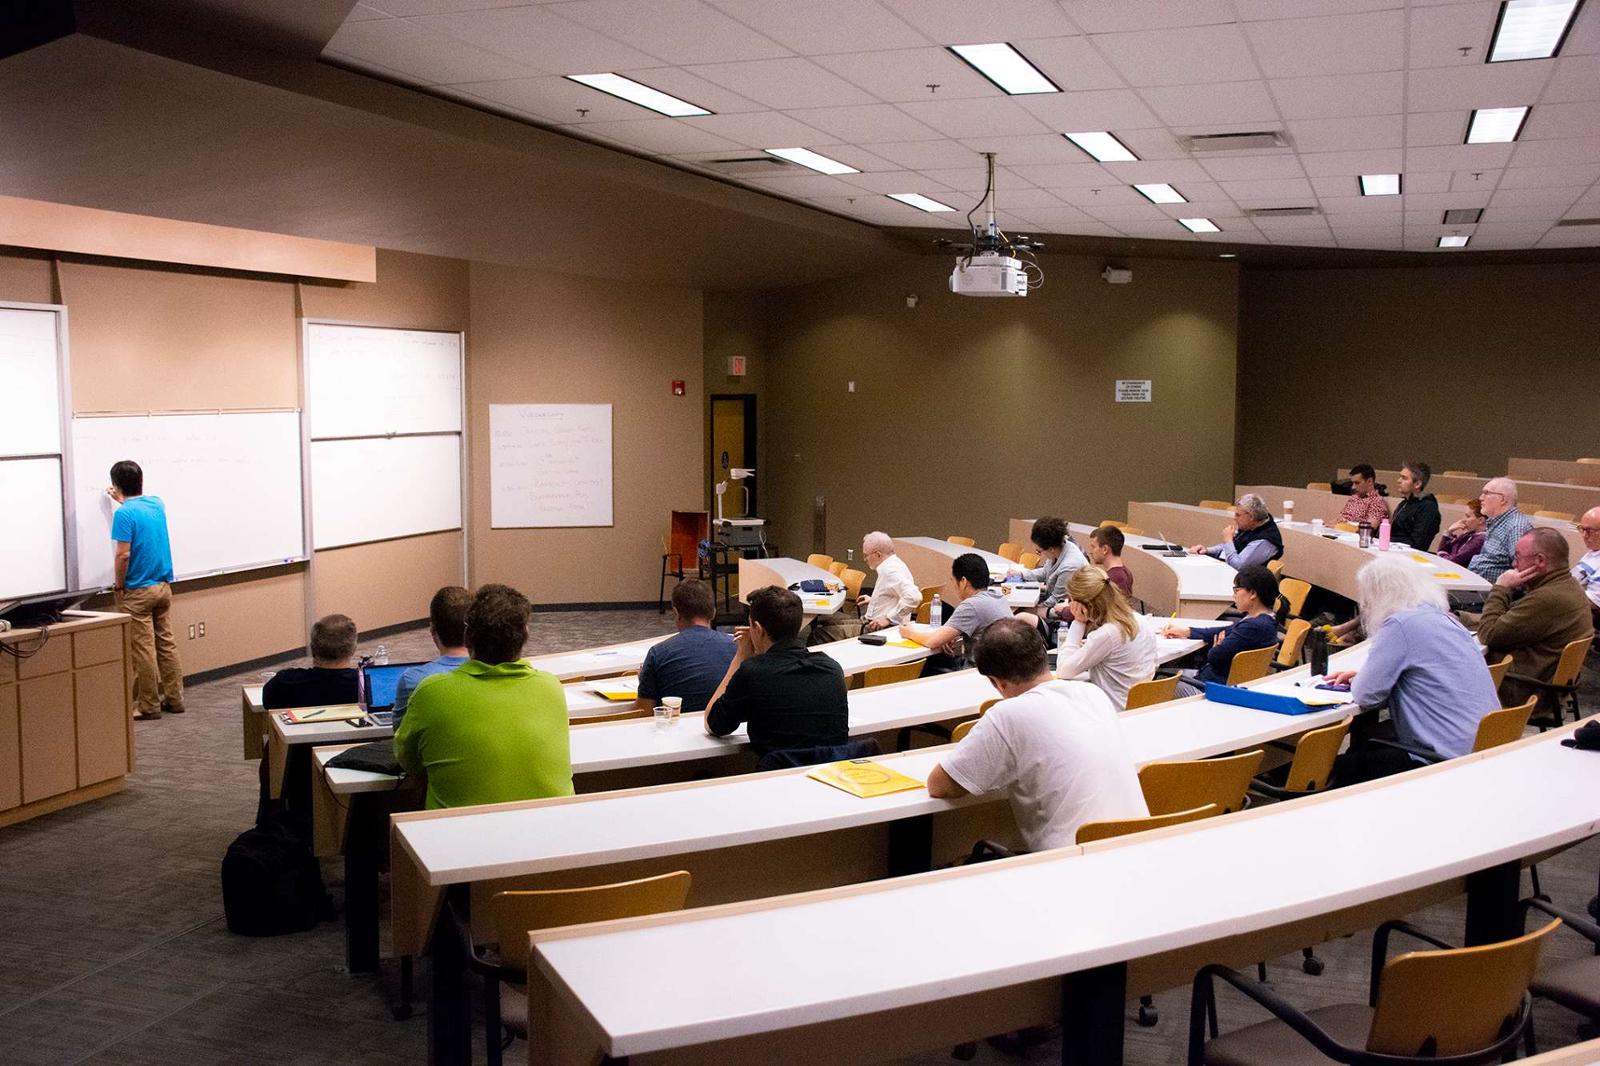 A classroom lecture theatre filled with students